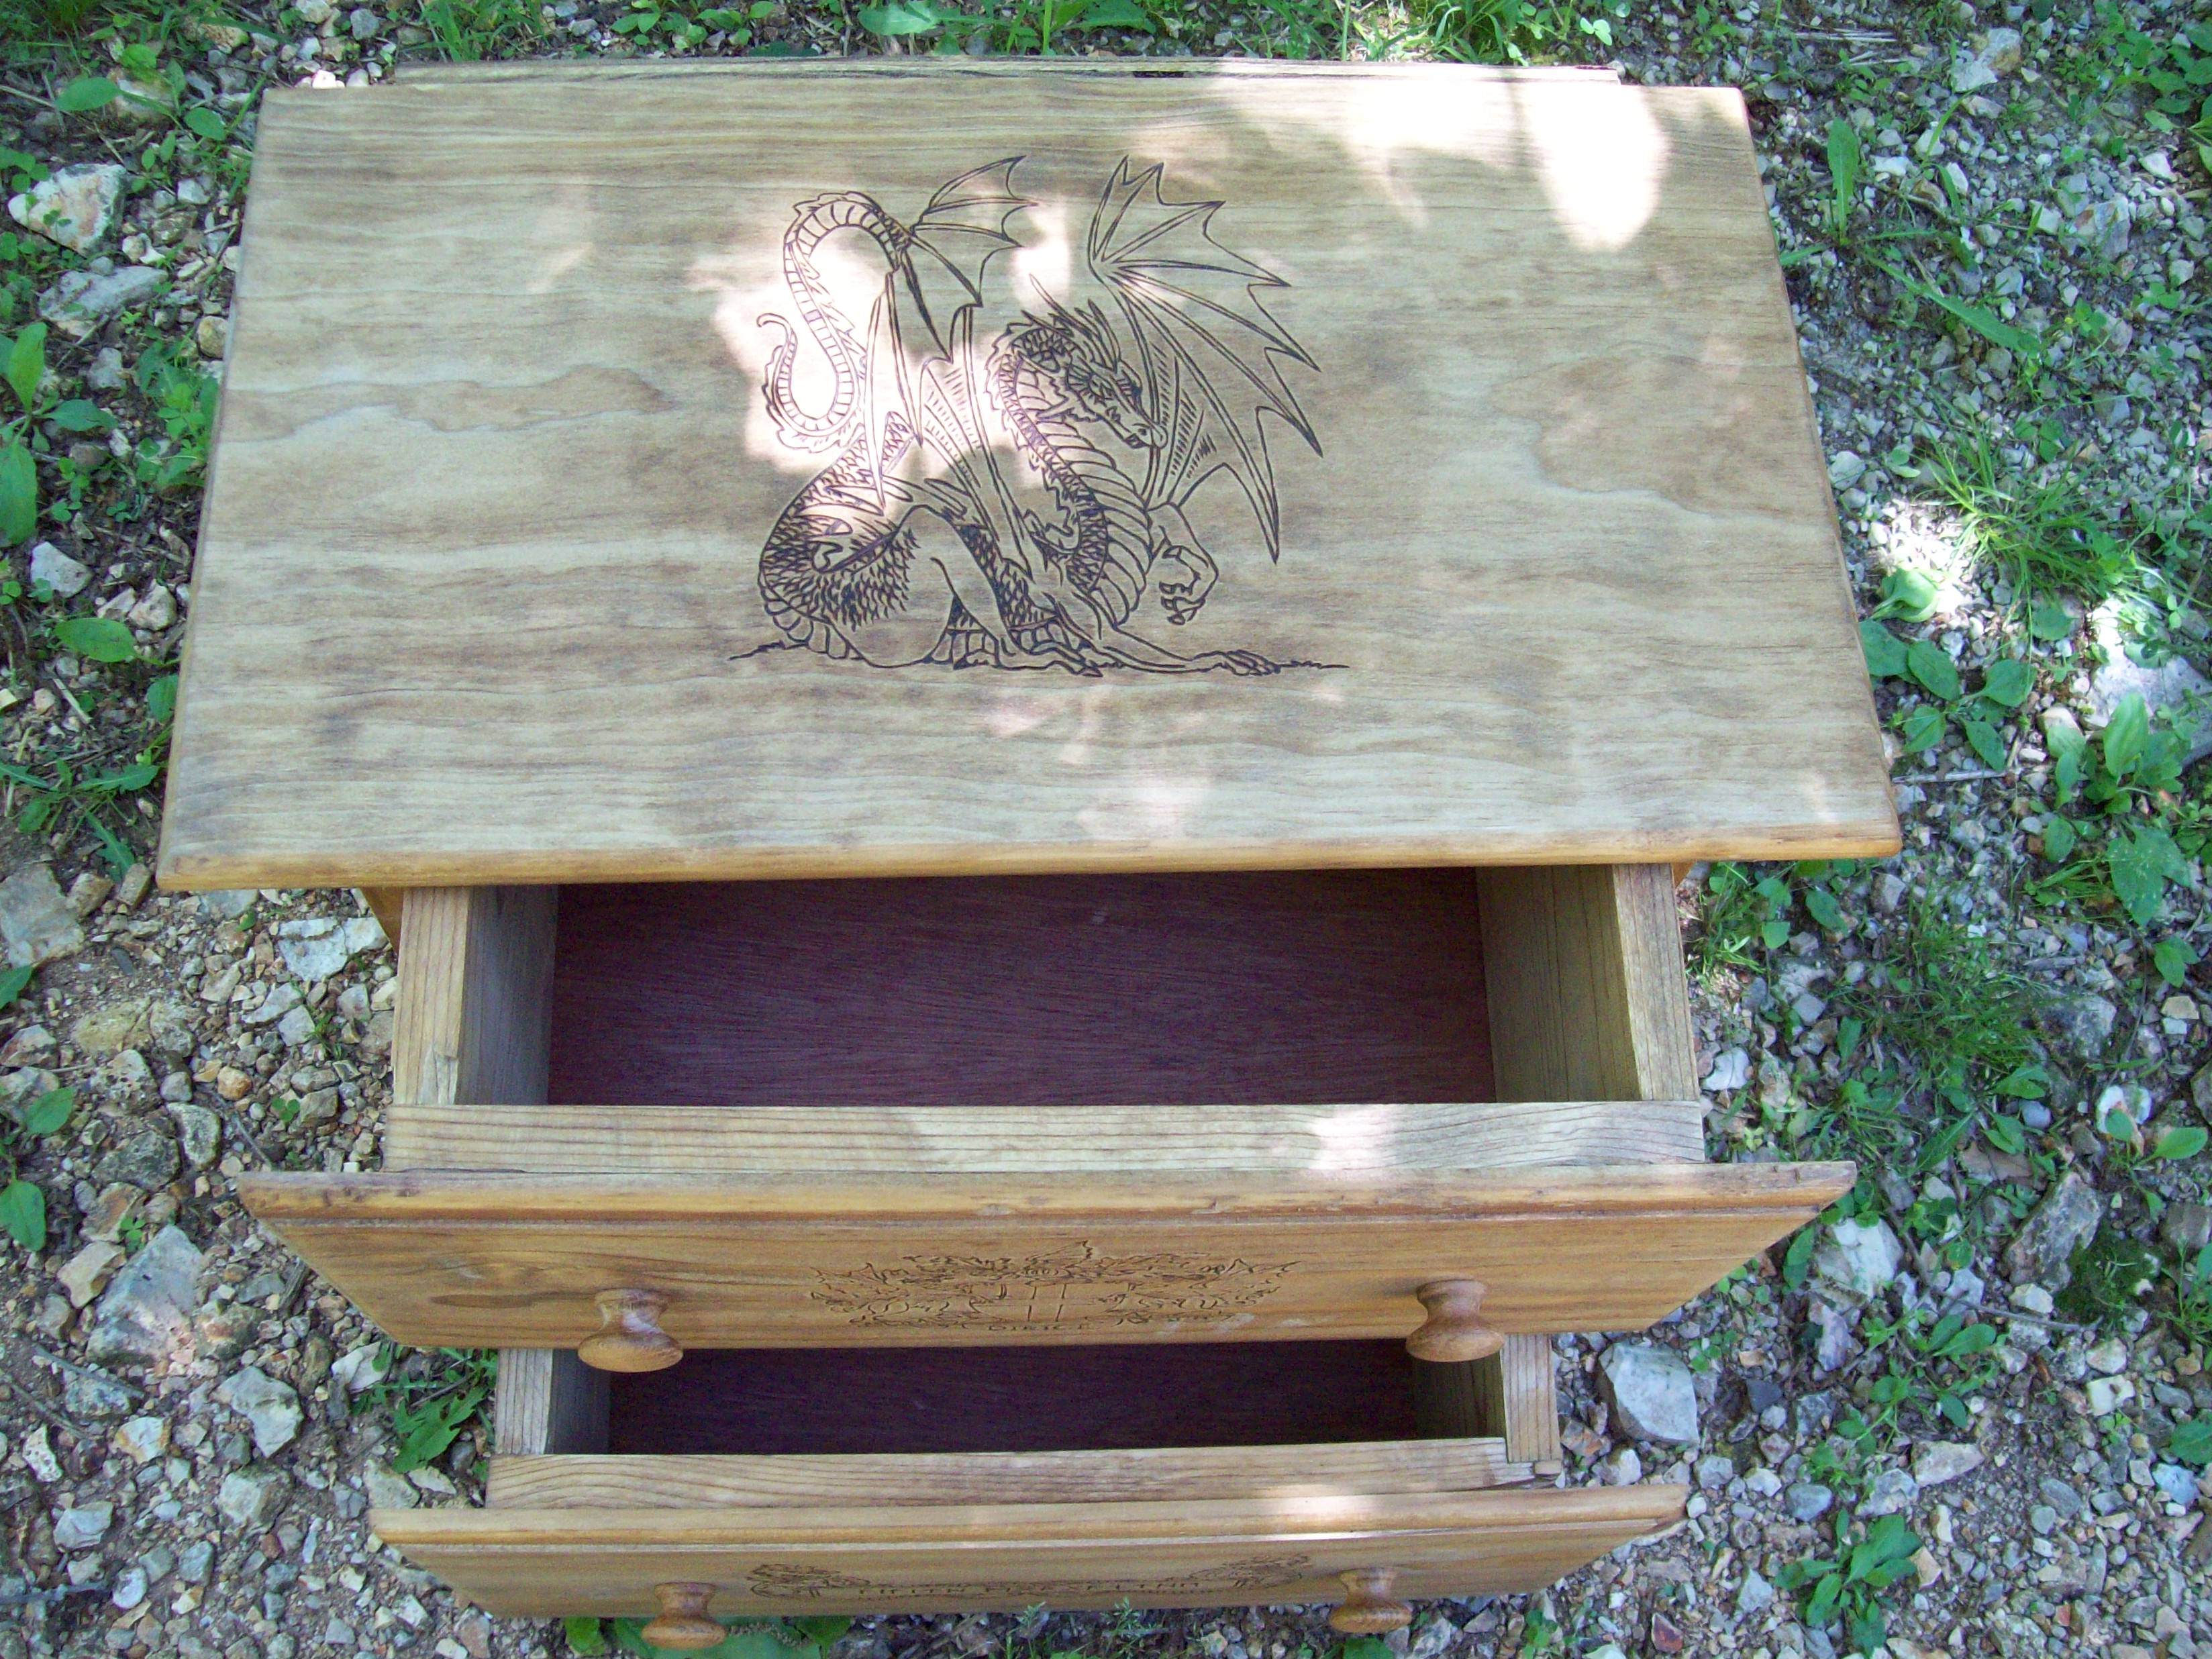 Two full sized drawers on the dragon fable stand.